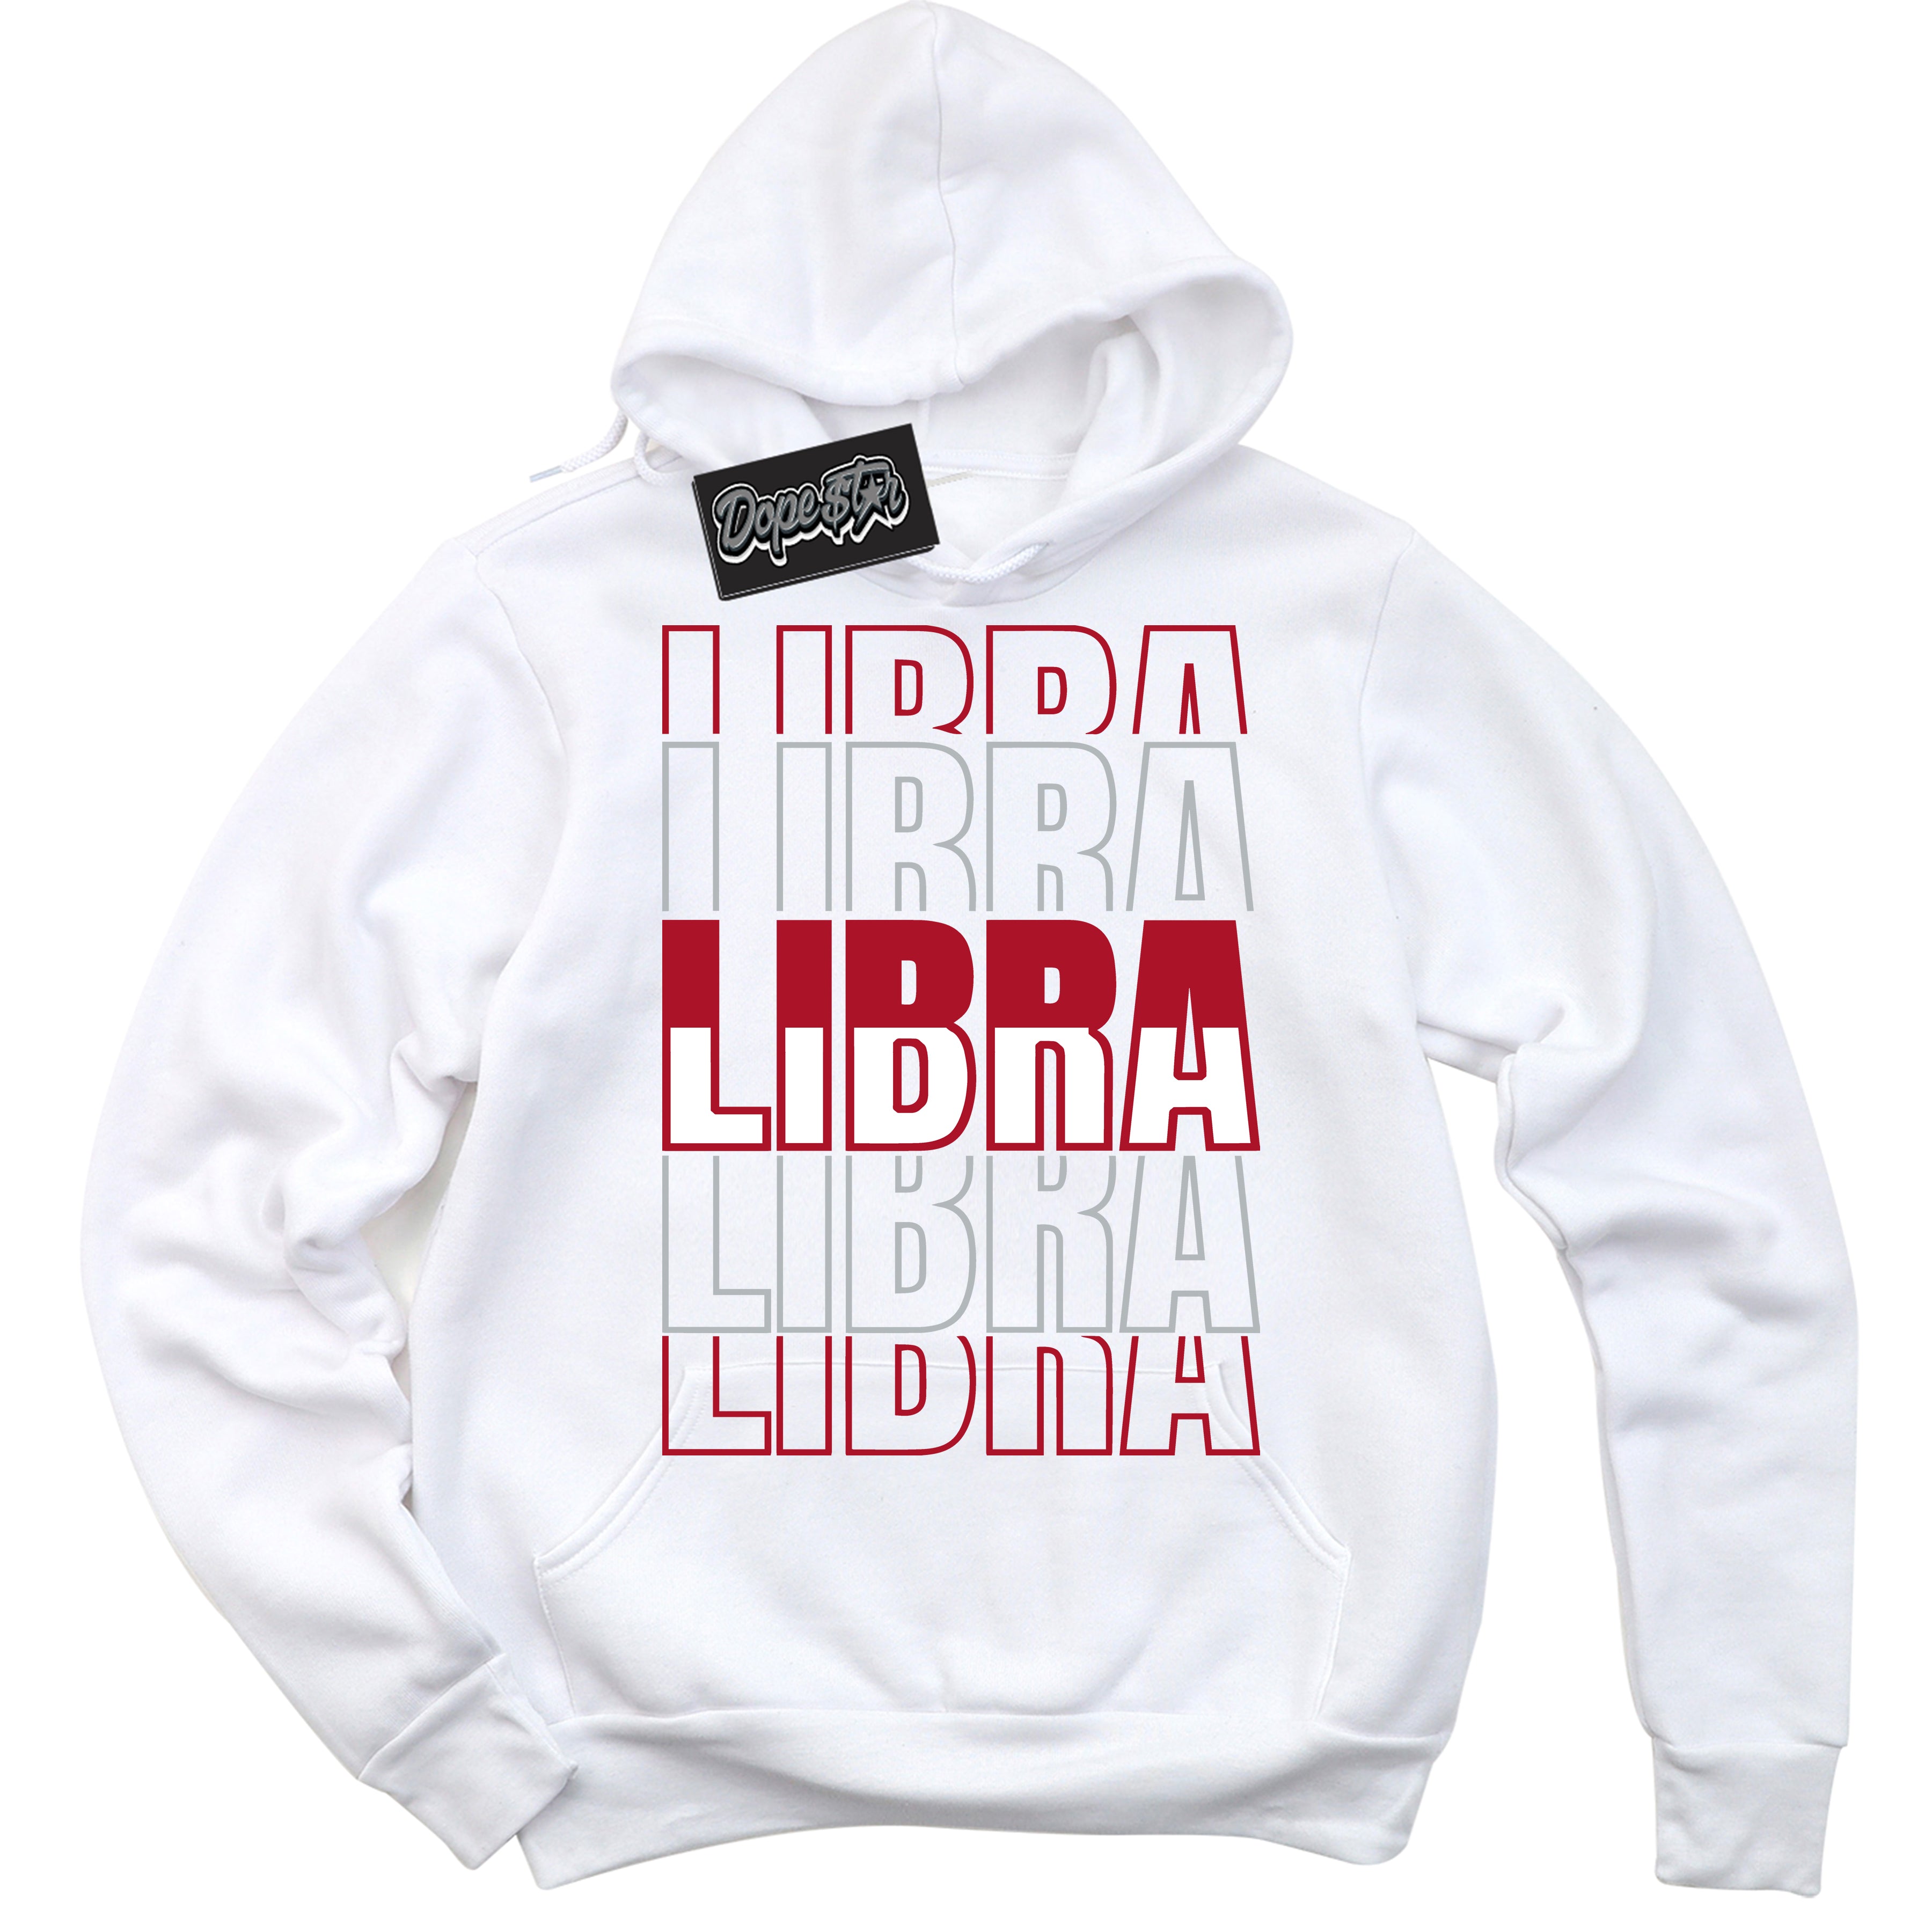 Cool White Hoodie with “ Libra ”  design that Perfectly Matches Reverse Ultraman Sneakers.